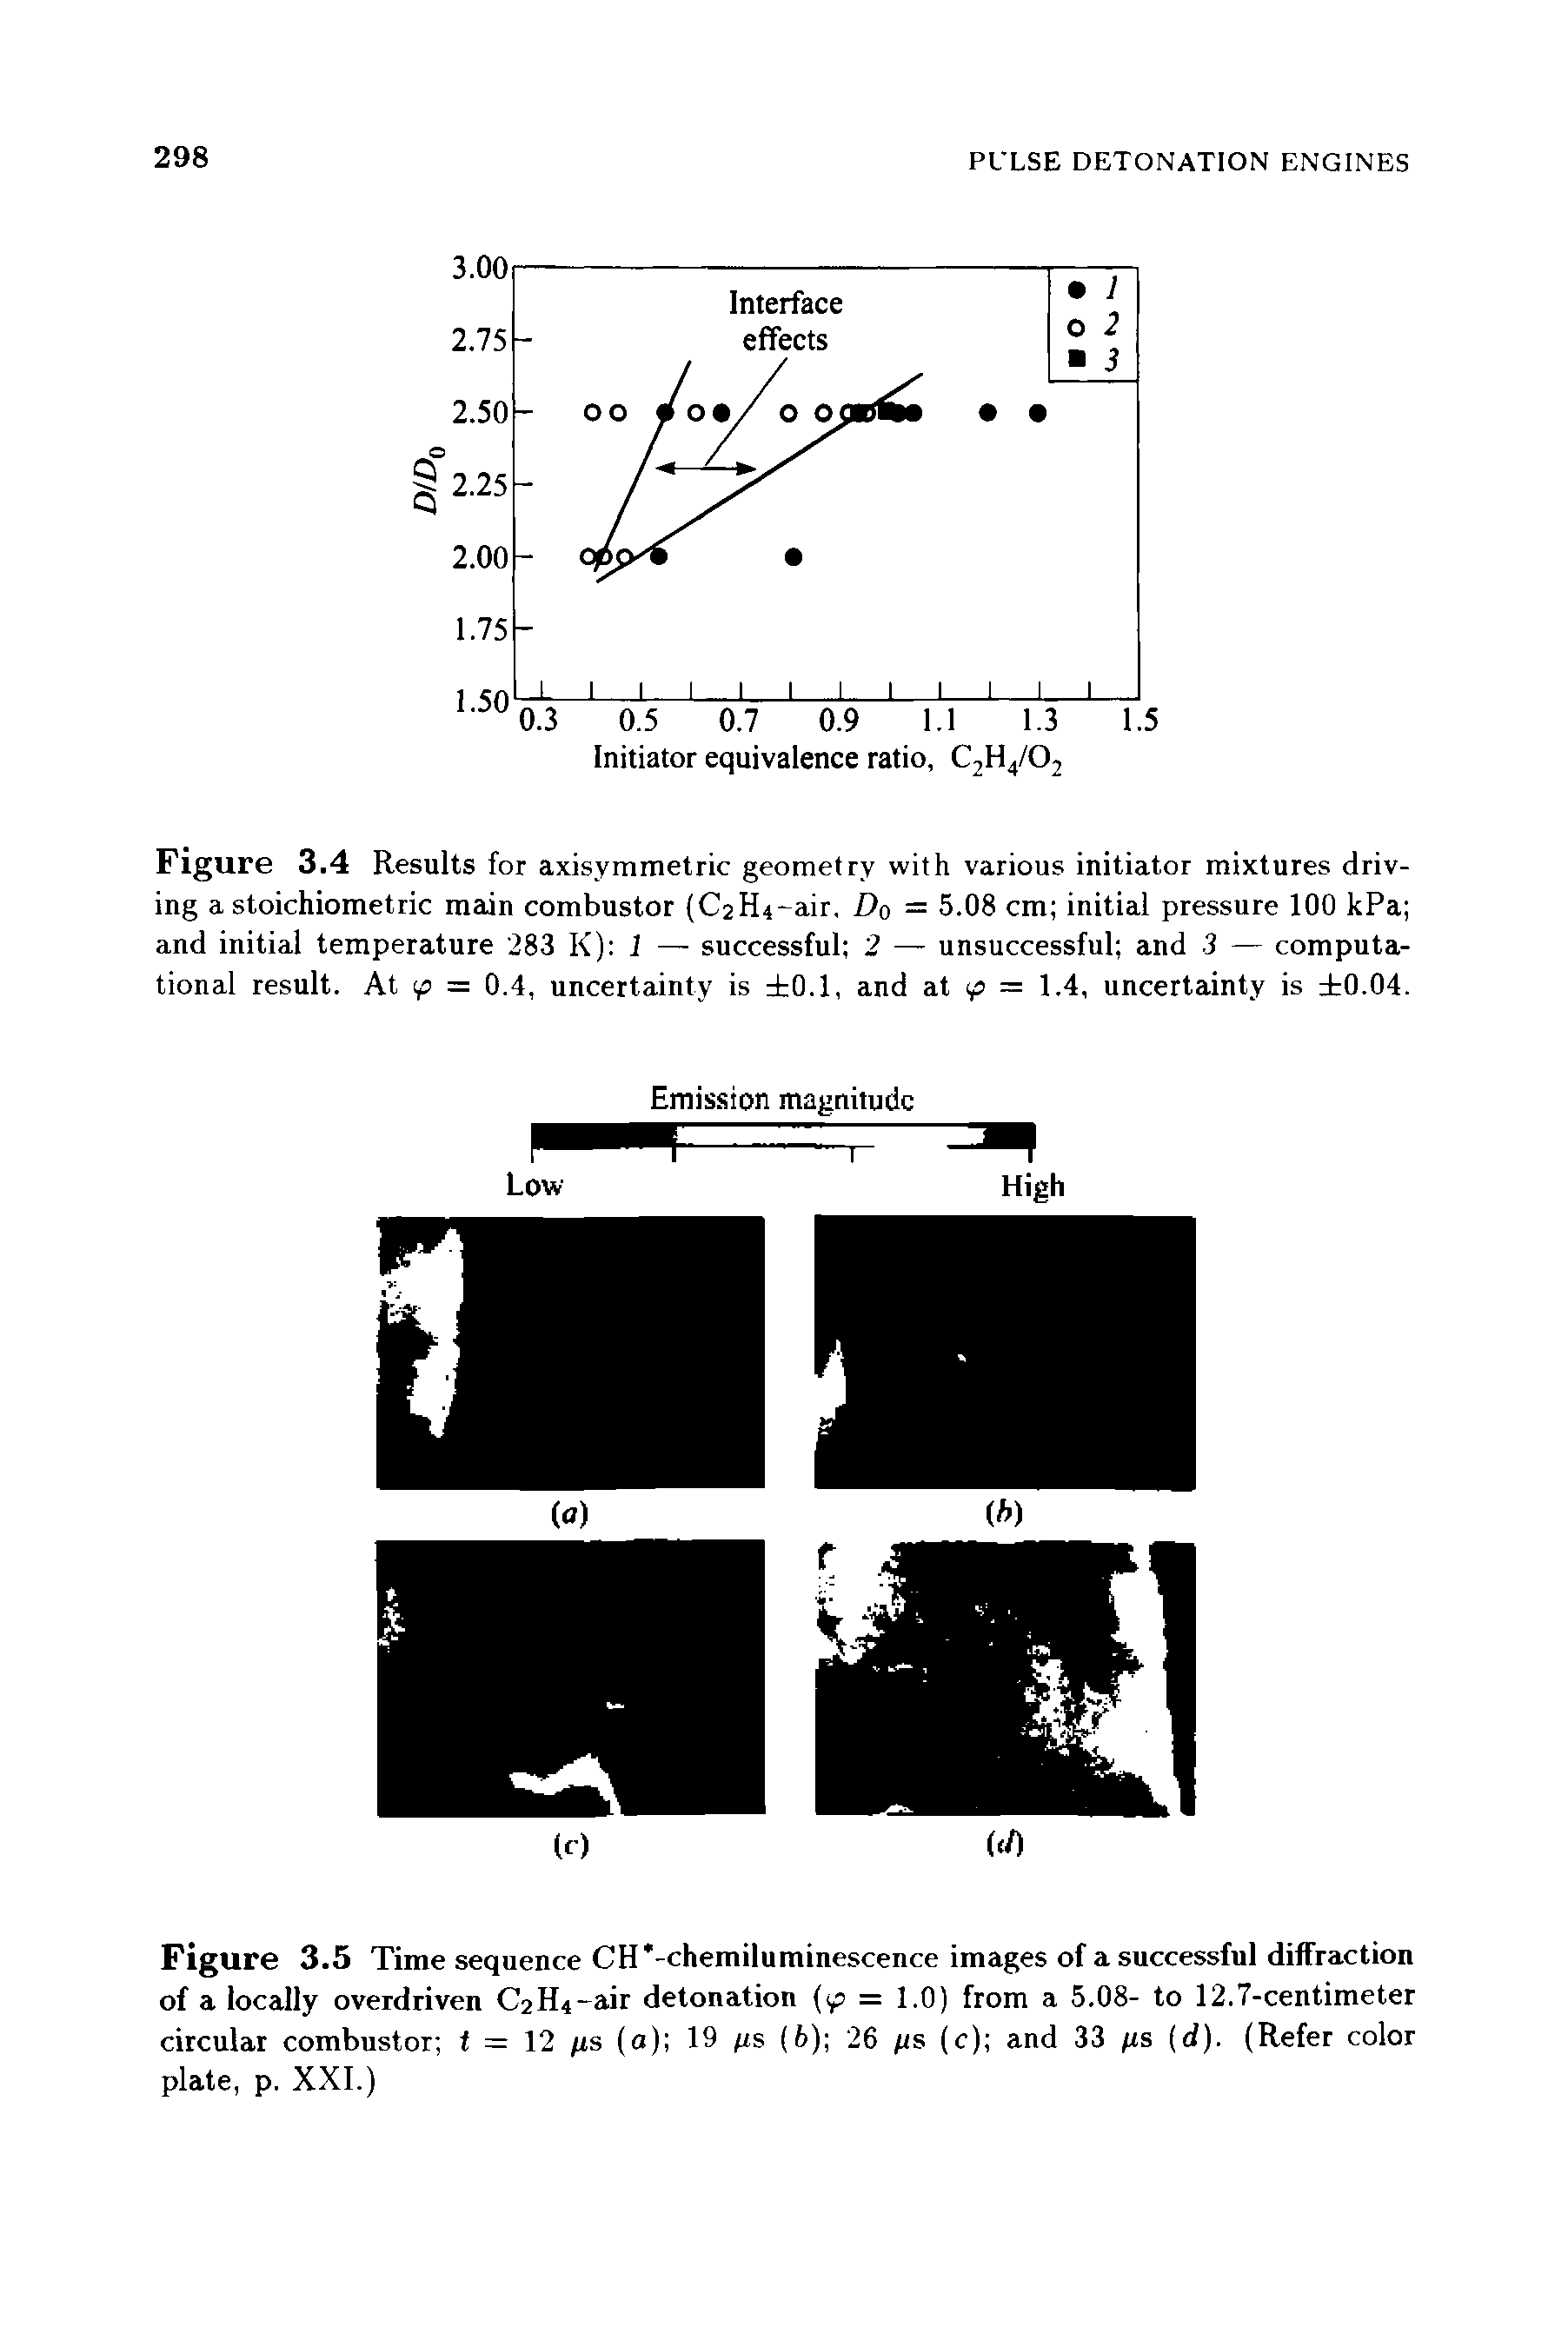 Figure 3.4 Results for axisymmetric geometry with various initiator mixtures driving a stoichiometric main combustor (C2H4-air, Do = 5.08 cm initial pressure 100 kPa and initial temperature 283 K) 1 — successful 2 — unsuccessful and 3 — computational result. At ( = 0.4, uncertainty is 0.1, and at 1,2 = 1.4, uncertainty is 0.04.